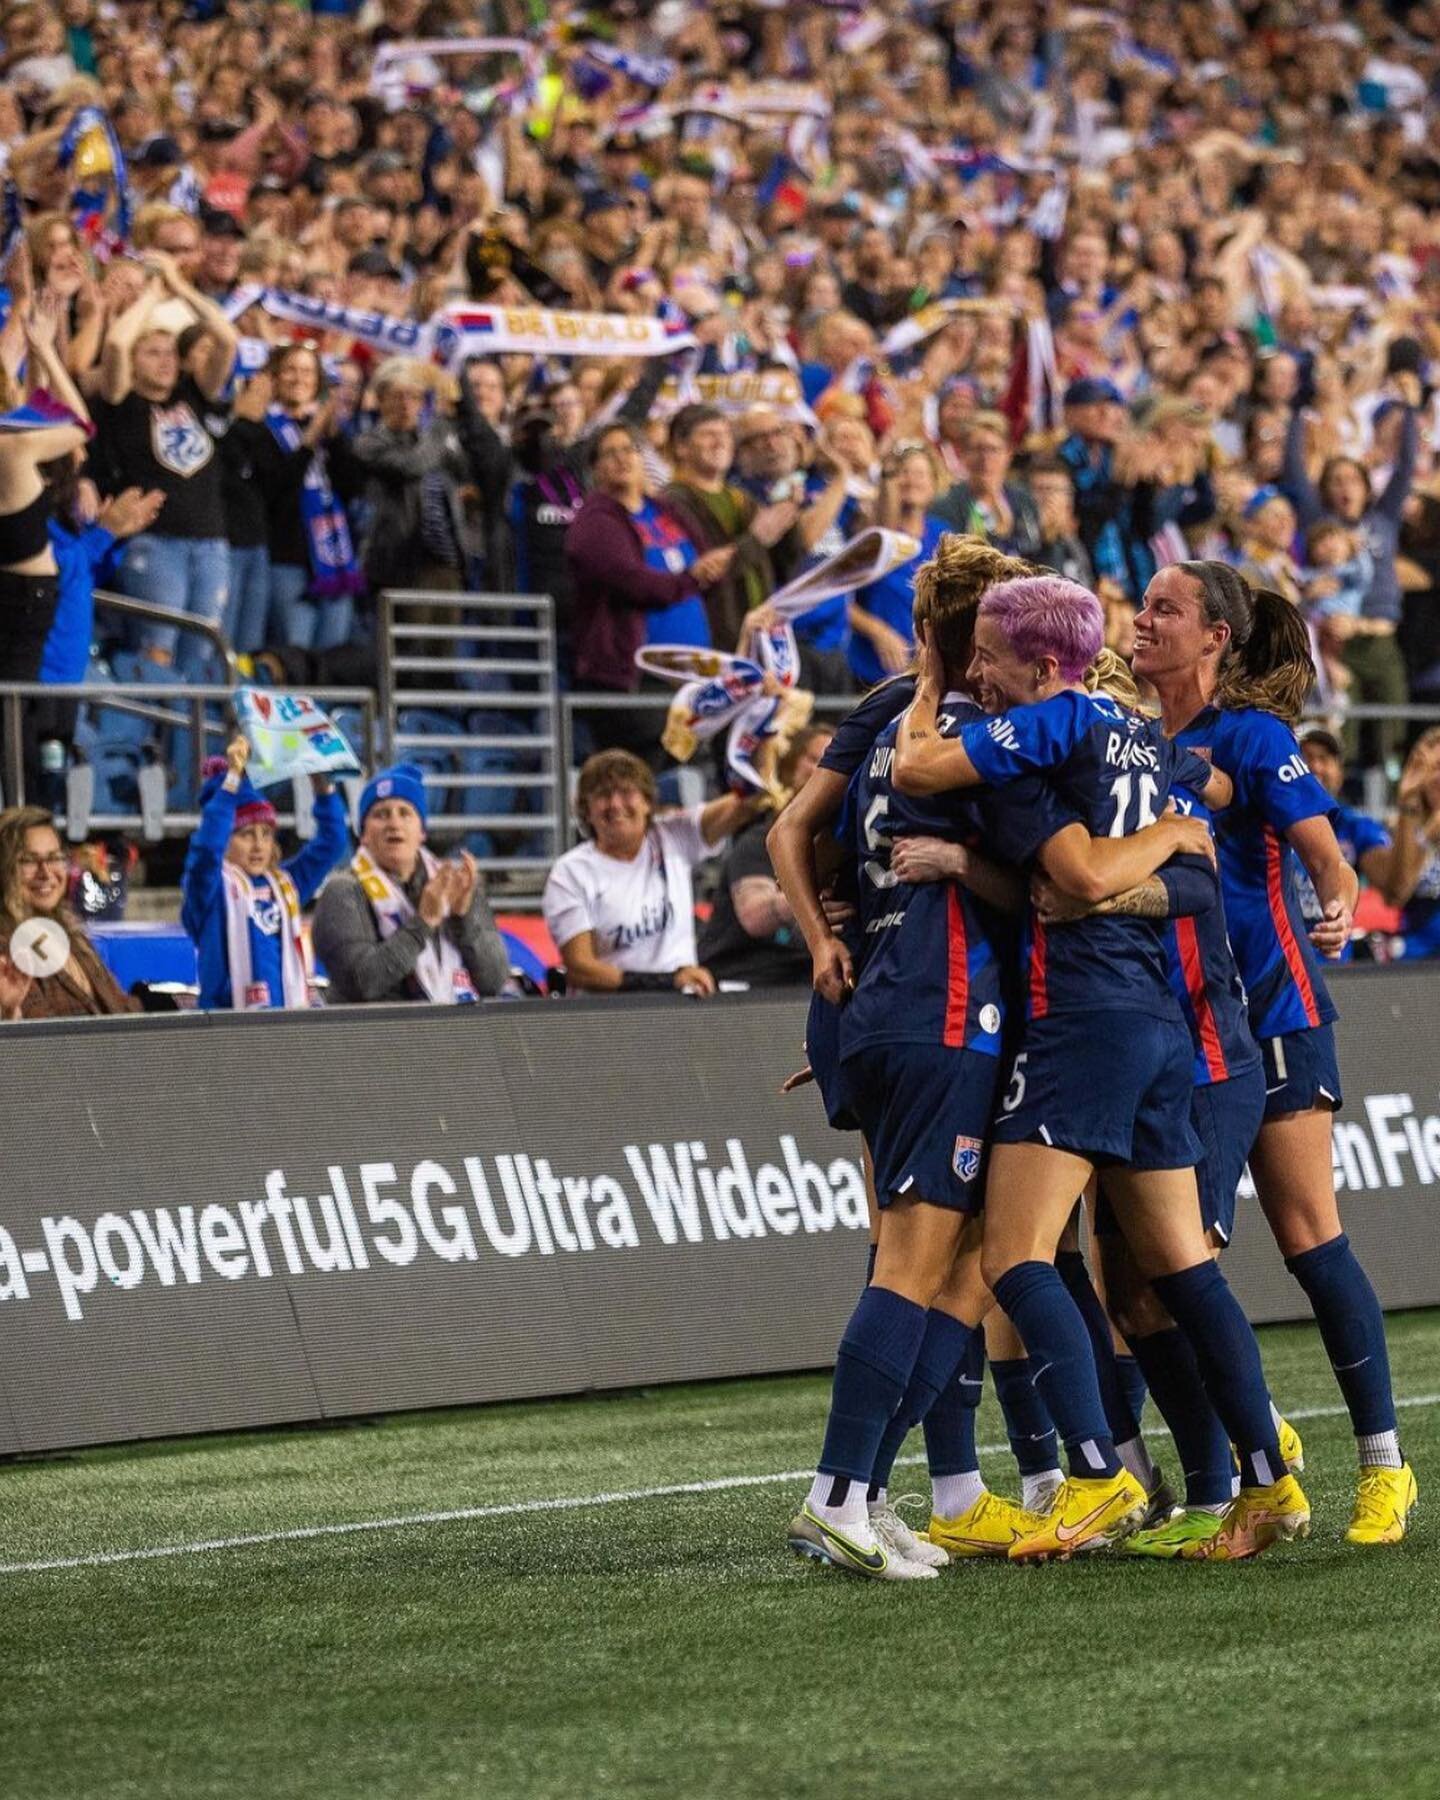 The National Women&rsquo;s Soccer League today announced the competition framework for its 11th season. The league will play a total of 176 games between the reformatted NWSL Challenge Cup and the regular season. Each team will have 22 regular season